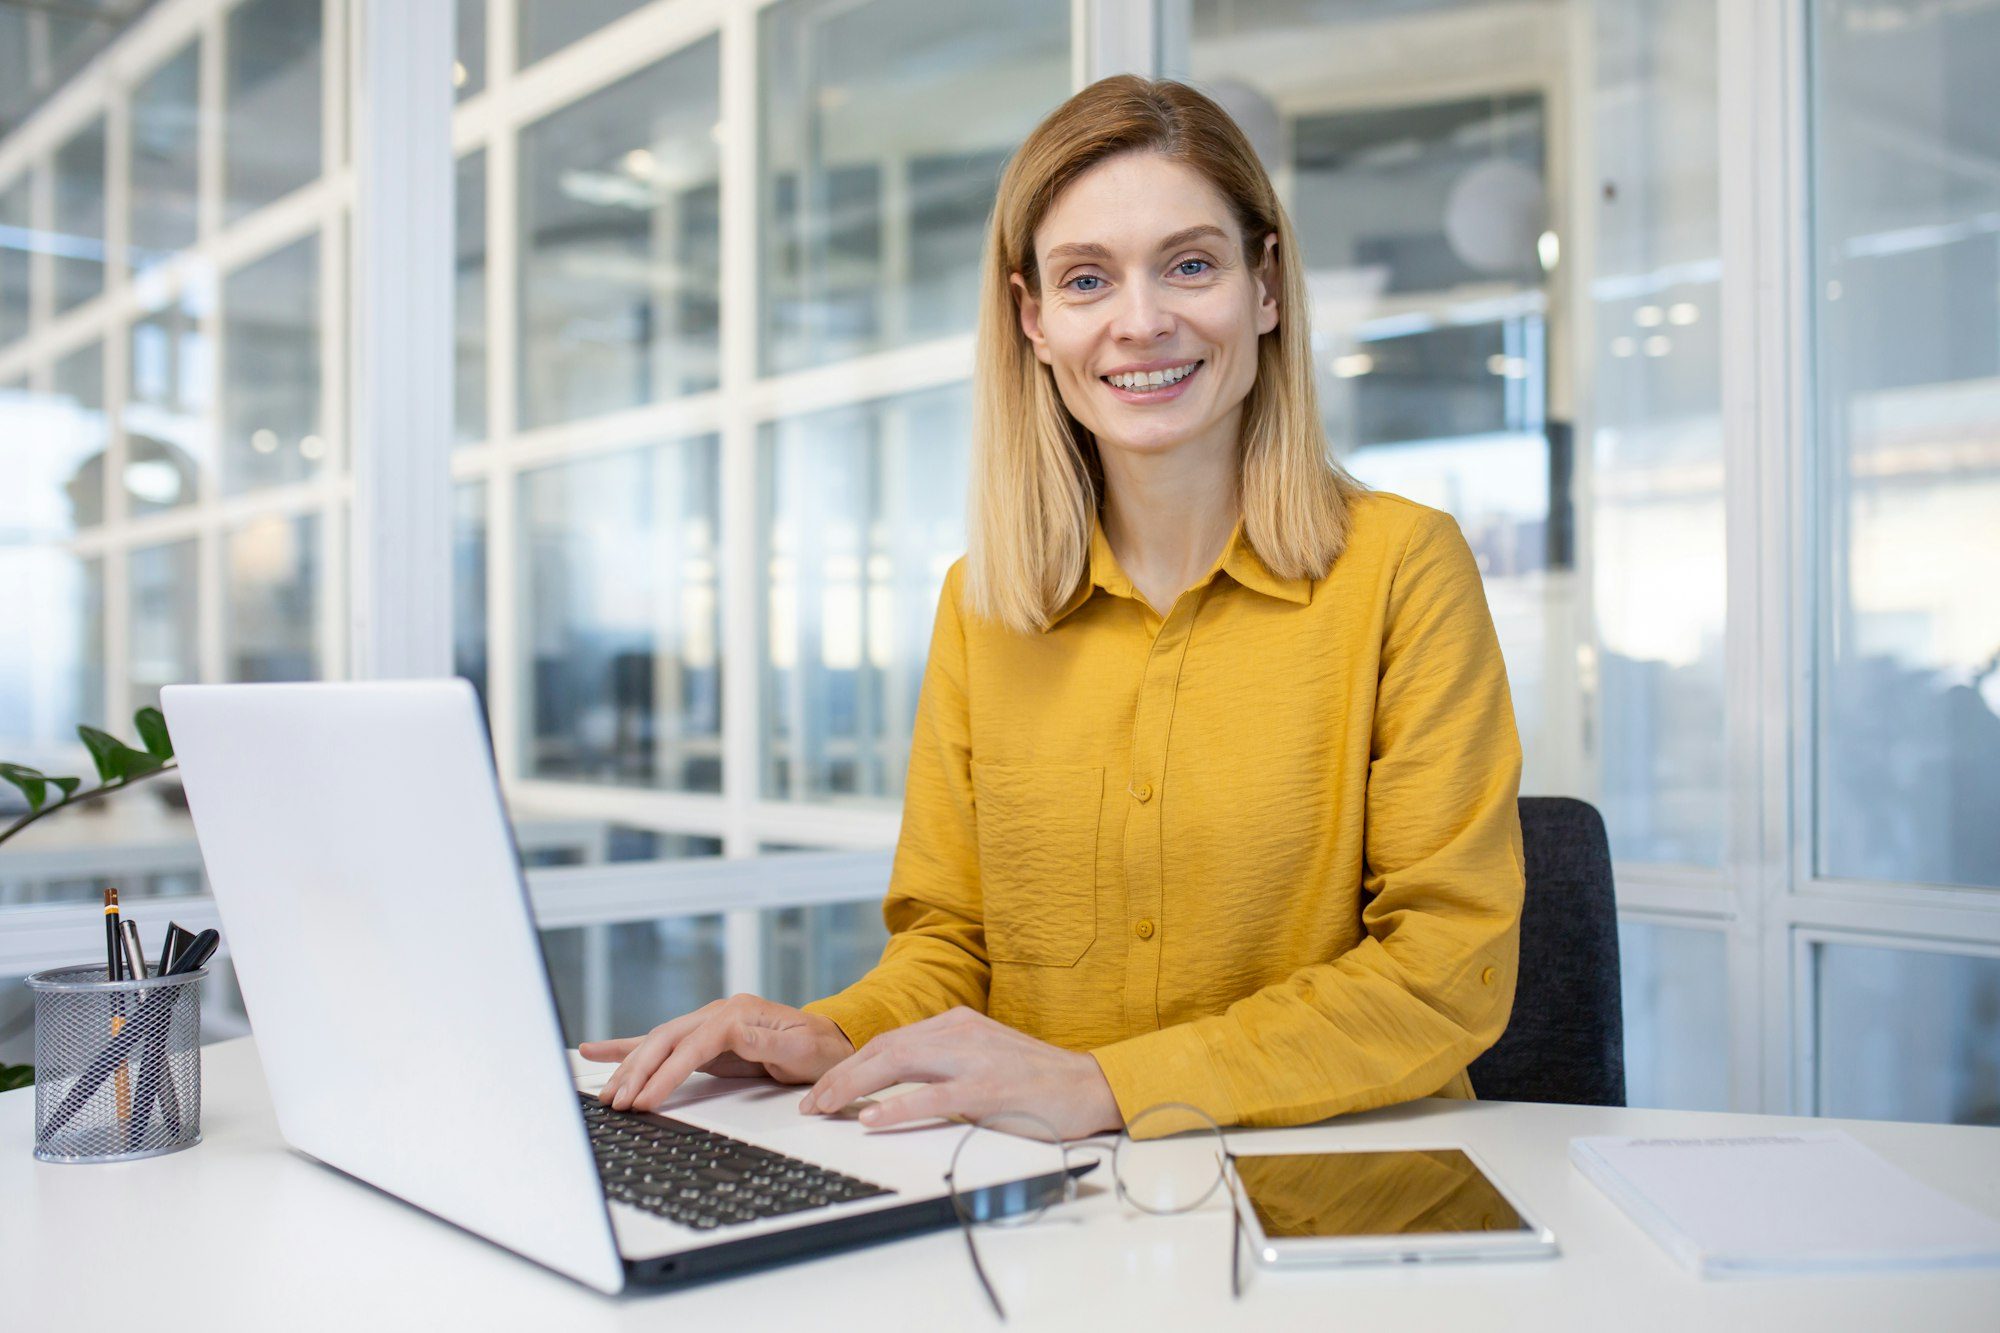 Empowered businesswoman working happily in office